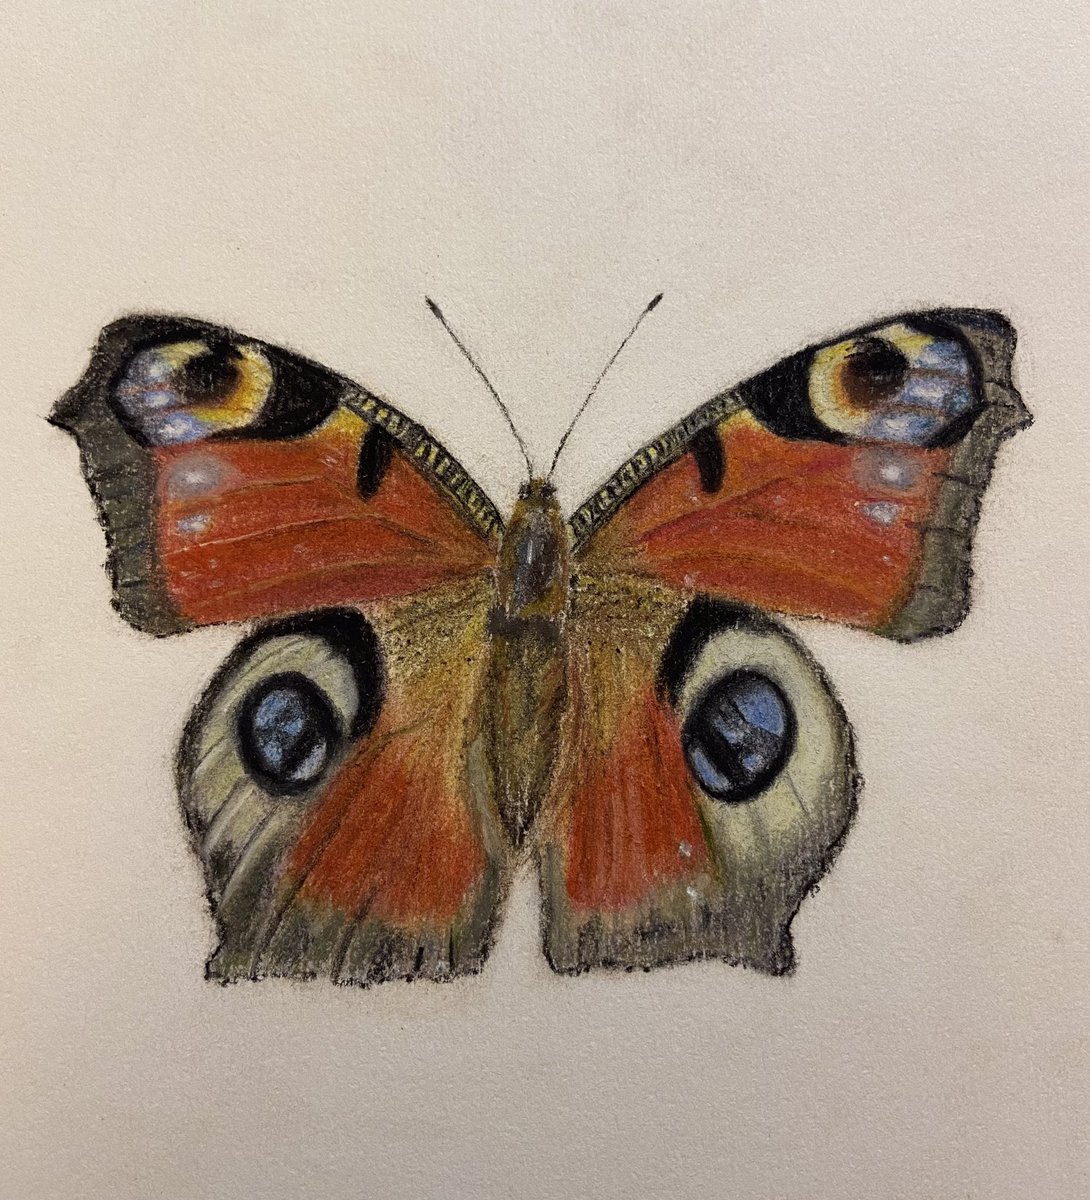 On a brief visit here today I am sharing two #butterfly #drawings of mine. I just finished the Painted Lady this week. Looking forward to warmer weather in the spring when these lovely creatures reappear. Happy 2024 all. 😘 #art #artist #pastels #butterflies #sketch